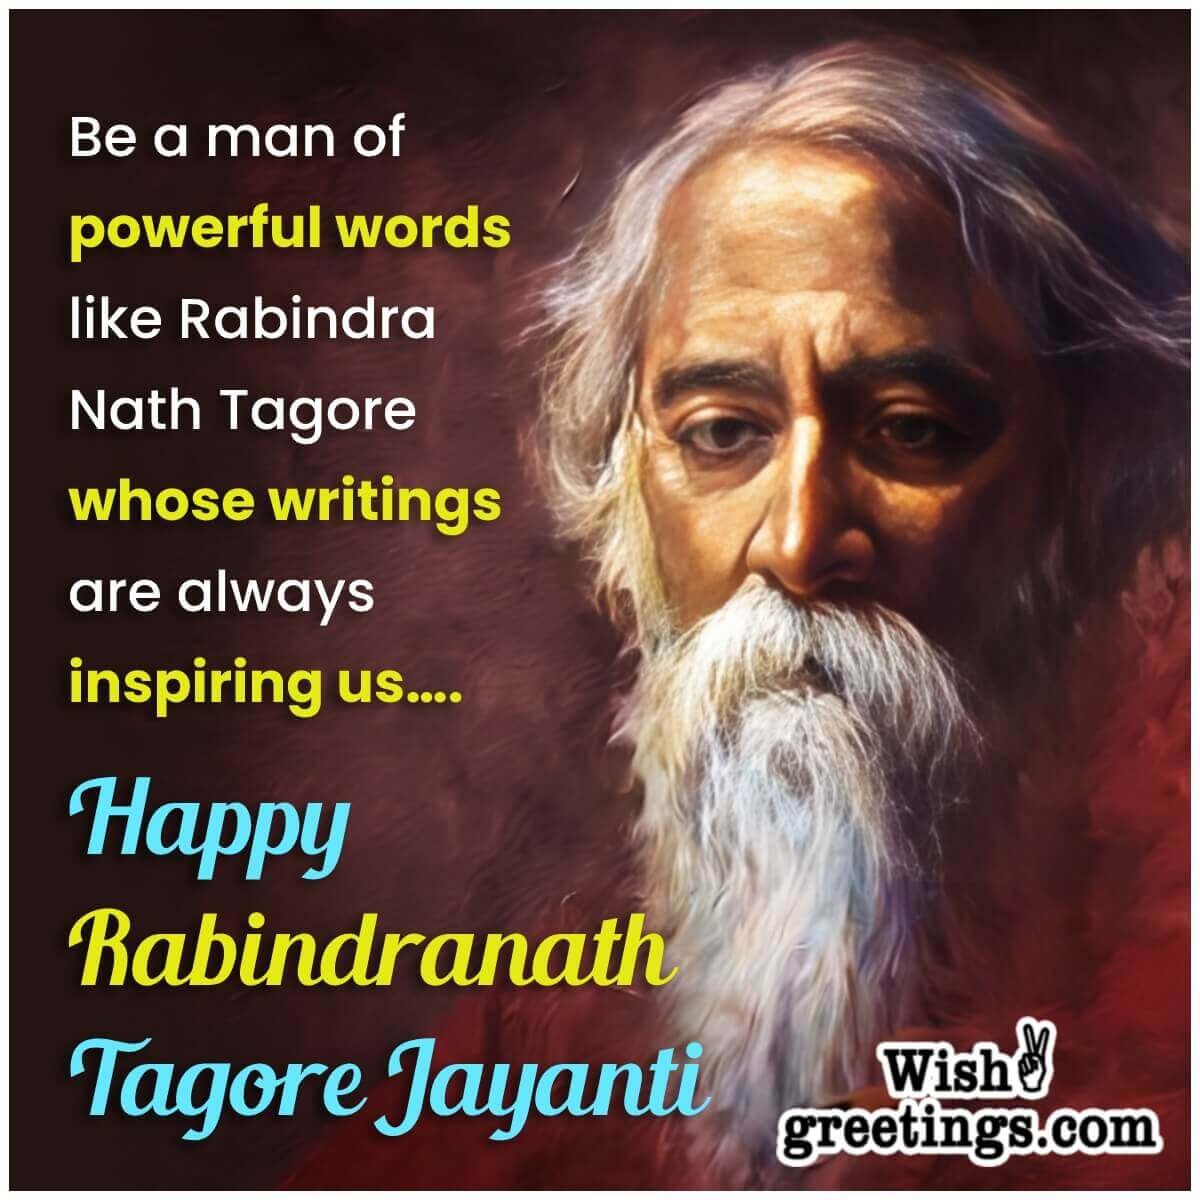 Rabindranath Tagore Jayanti Wishes Messages